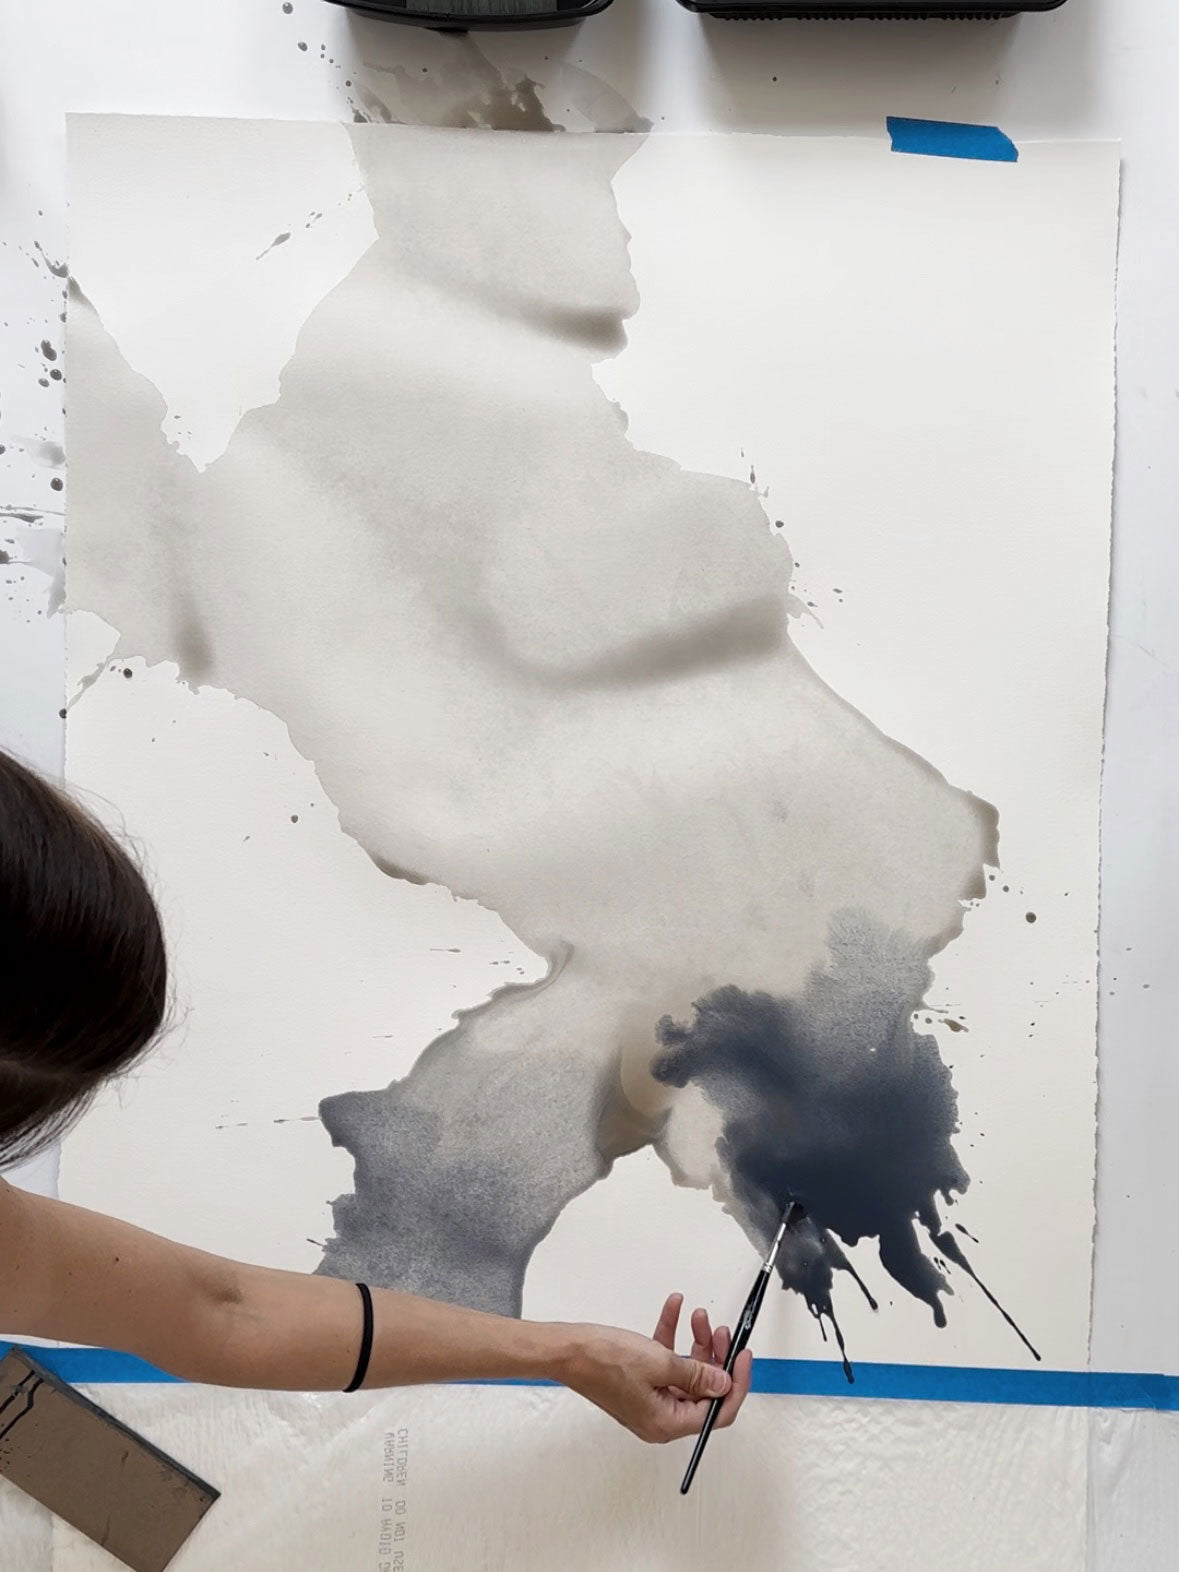 An organic splash of gray and blue watery paint being applied to paper